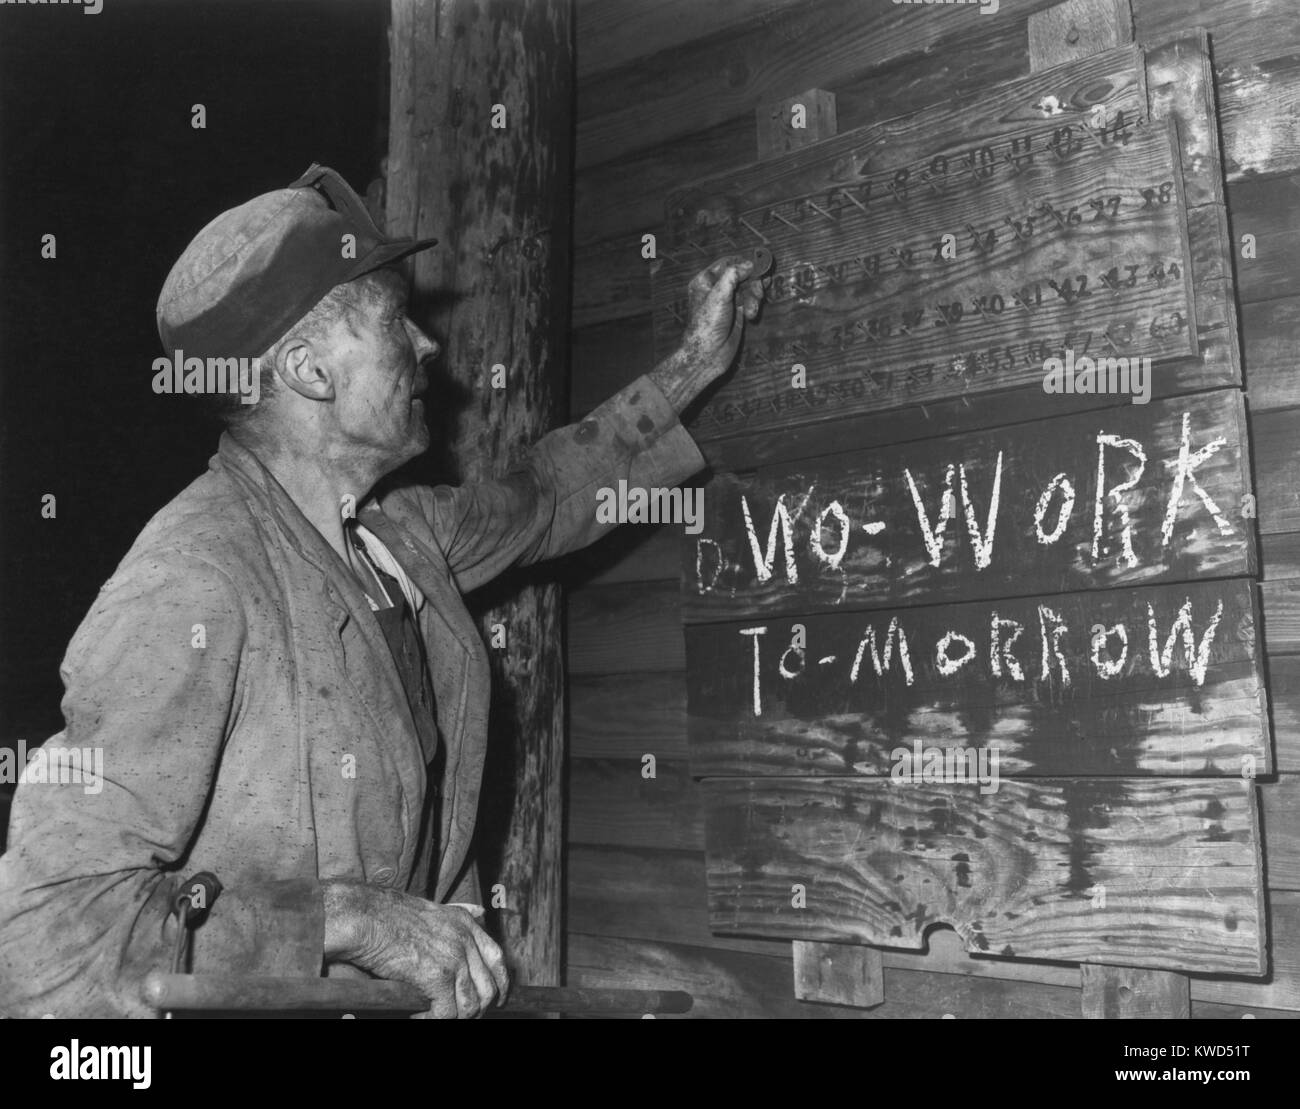 A coal loader putting up his check at the end of day's work on Friday, Sept. 13, 1946. Below the board is a notice in chalk writing, 'No Work Tomorrow' with 'N' written backwards. Harlan County, Kentucky. Photo by Russell Lee. (BSLOC 2014 13 234) Stock Photo